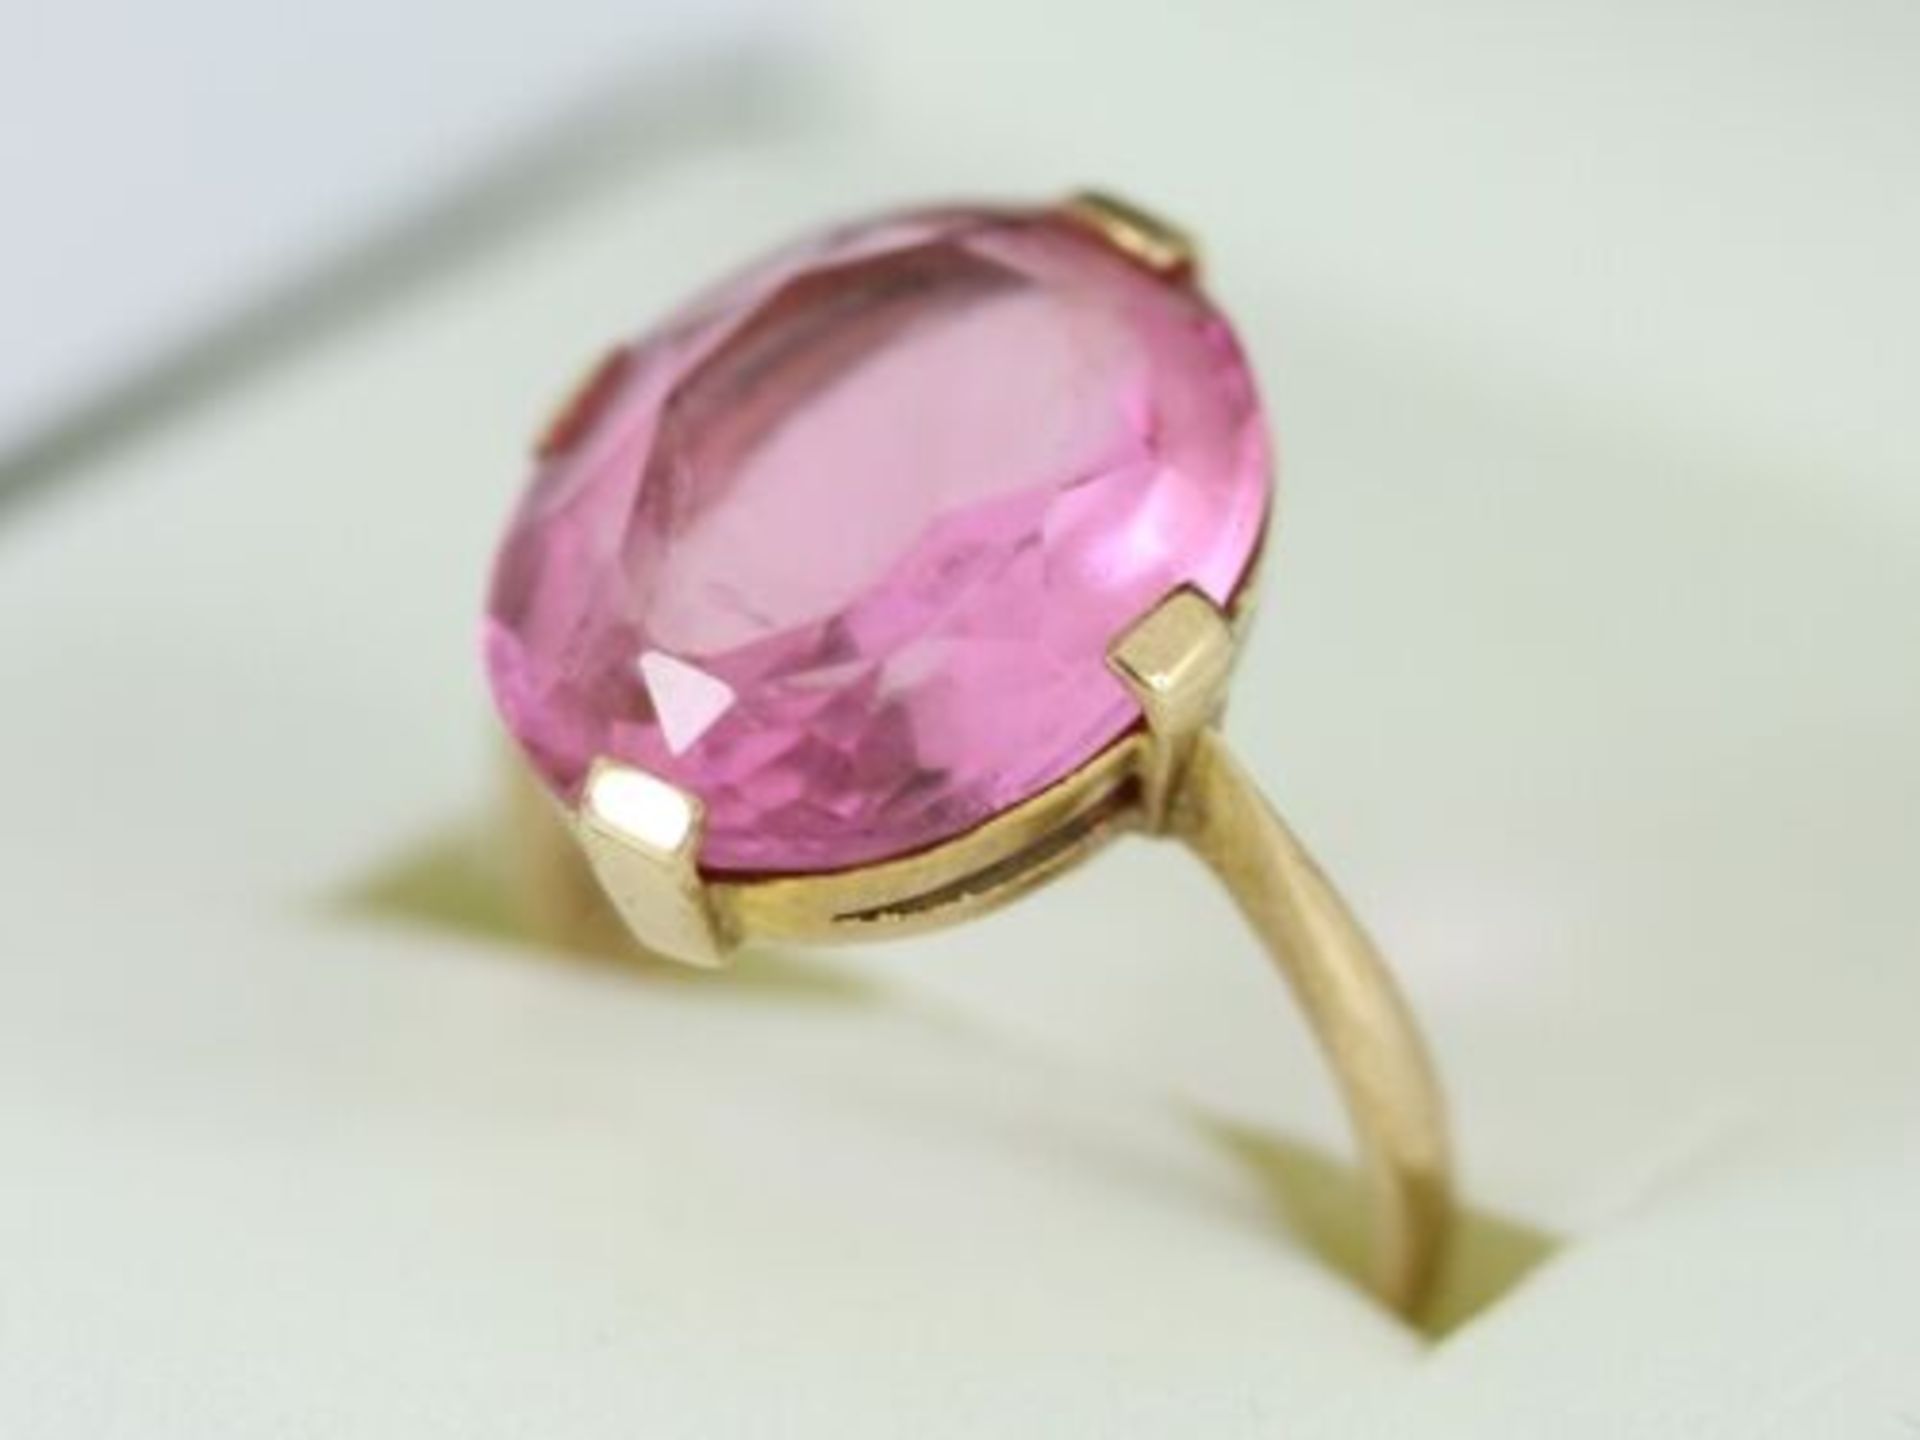 PINK GLASS SOLITAIRE RING 9CT GOLD LADIES SIZE K 1/2 375 3.1G CZ51 - Image 3 of 4